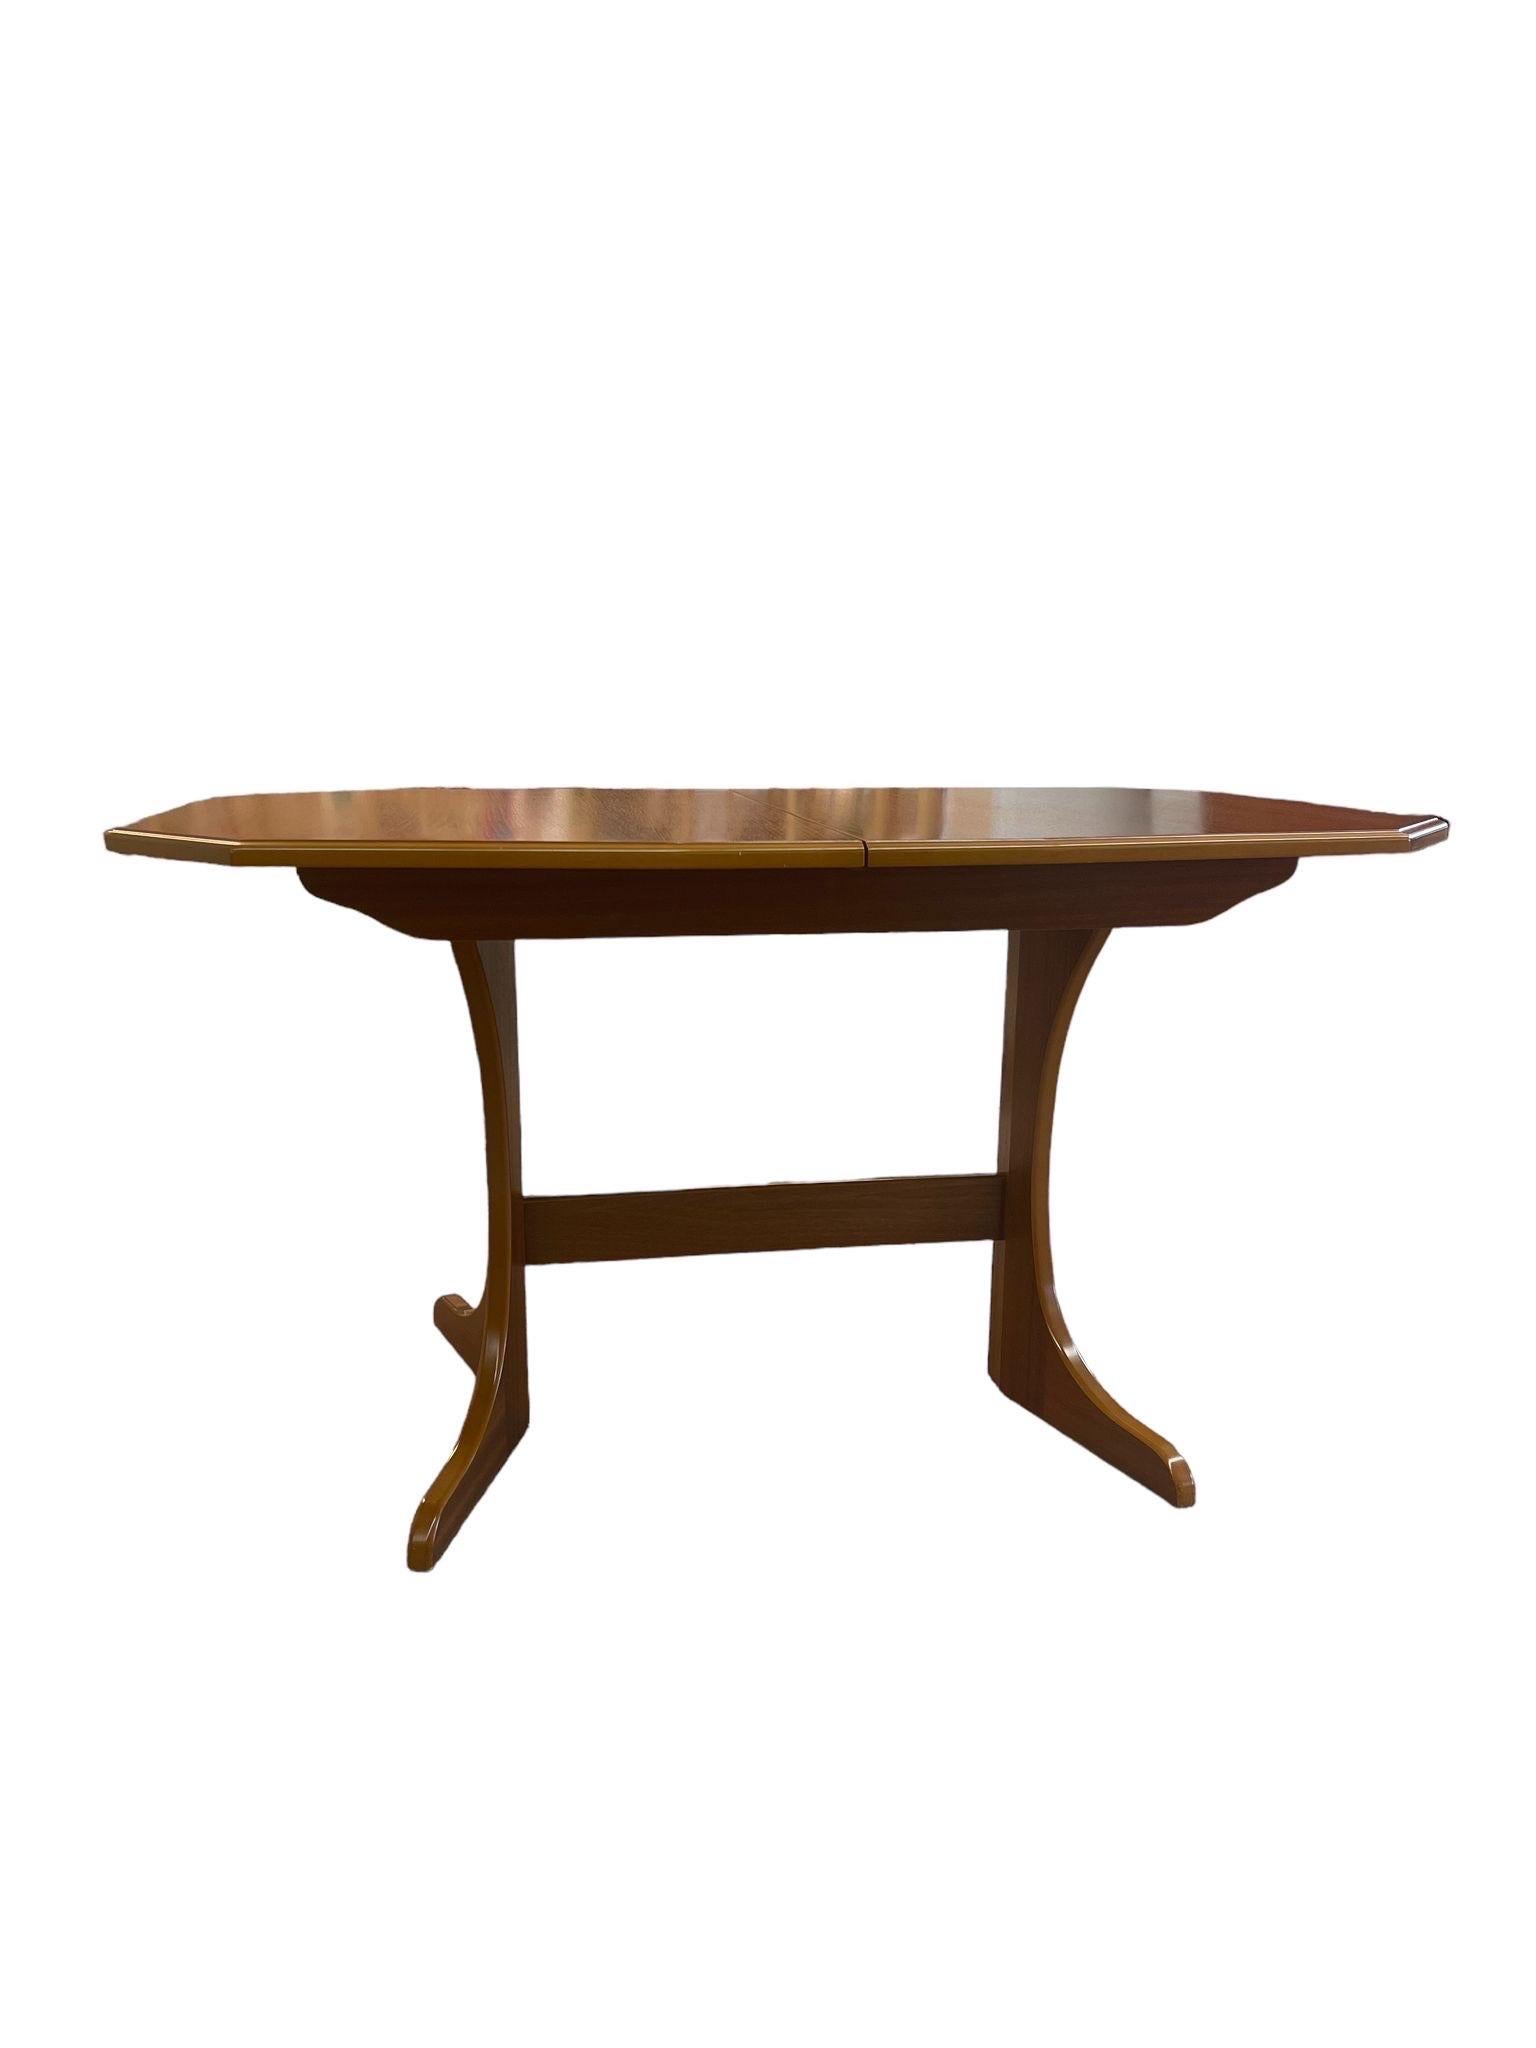 Vintage Dining Table with Original Finishes and Bevelled Edges. Mid Century Modern Lines Throughout. Insert has a “ Made in Germany “ as Pictured.

Dimensions. 55 W ; 33 1/2 D ; 30 H
Inserted . 35 1/2 W ; 15 D